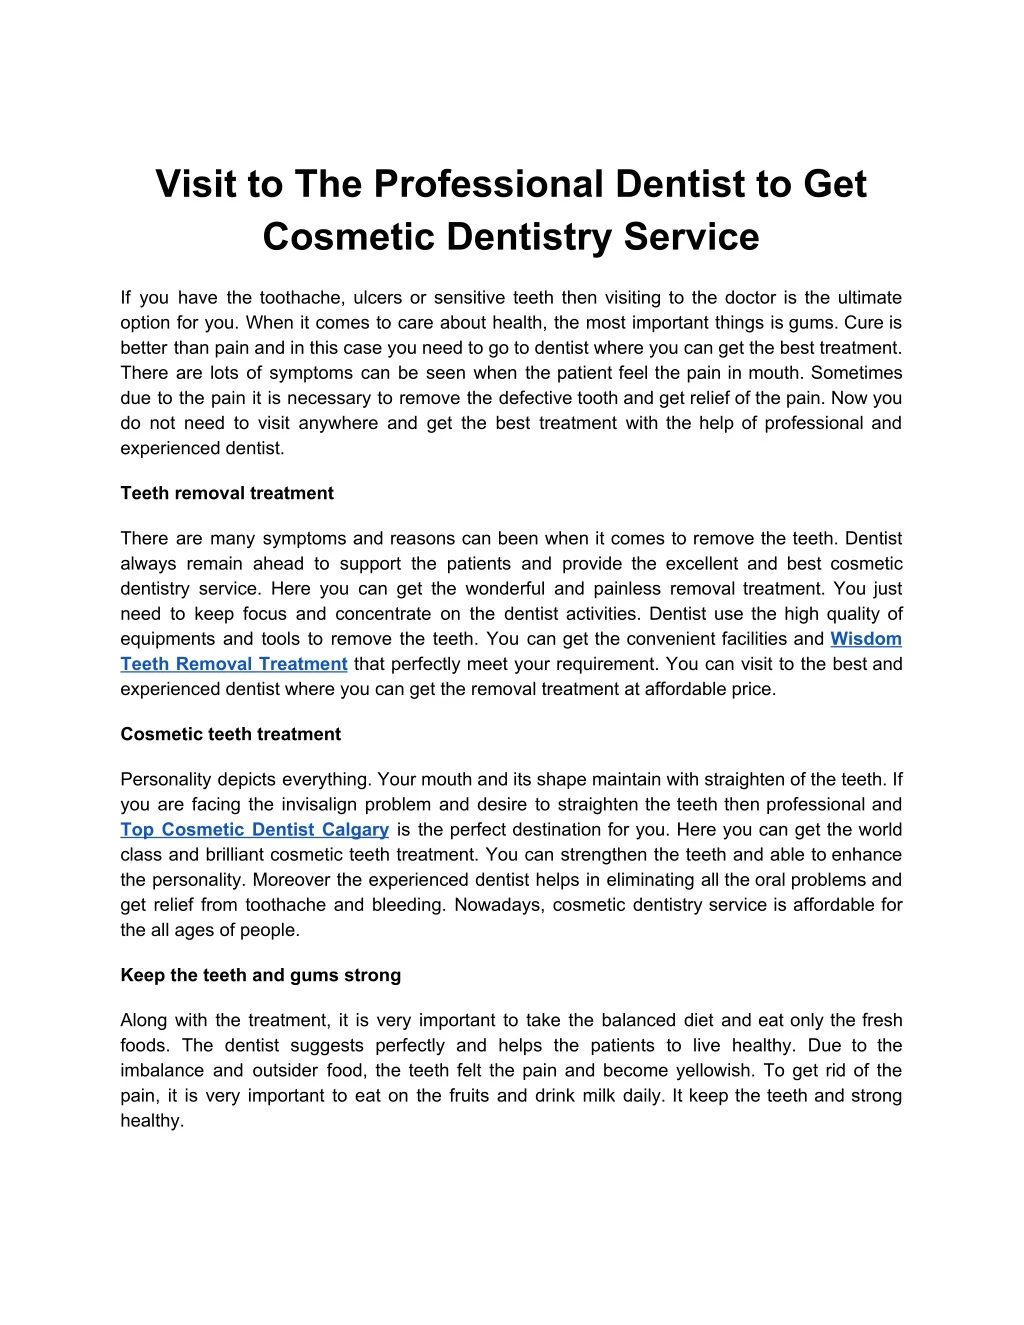 visit to the professional dentist to get cosmetic